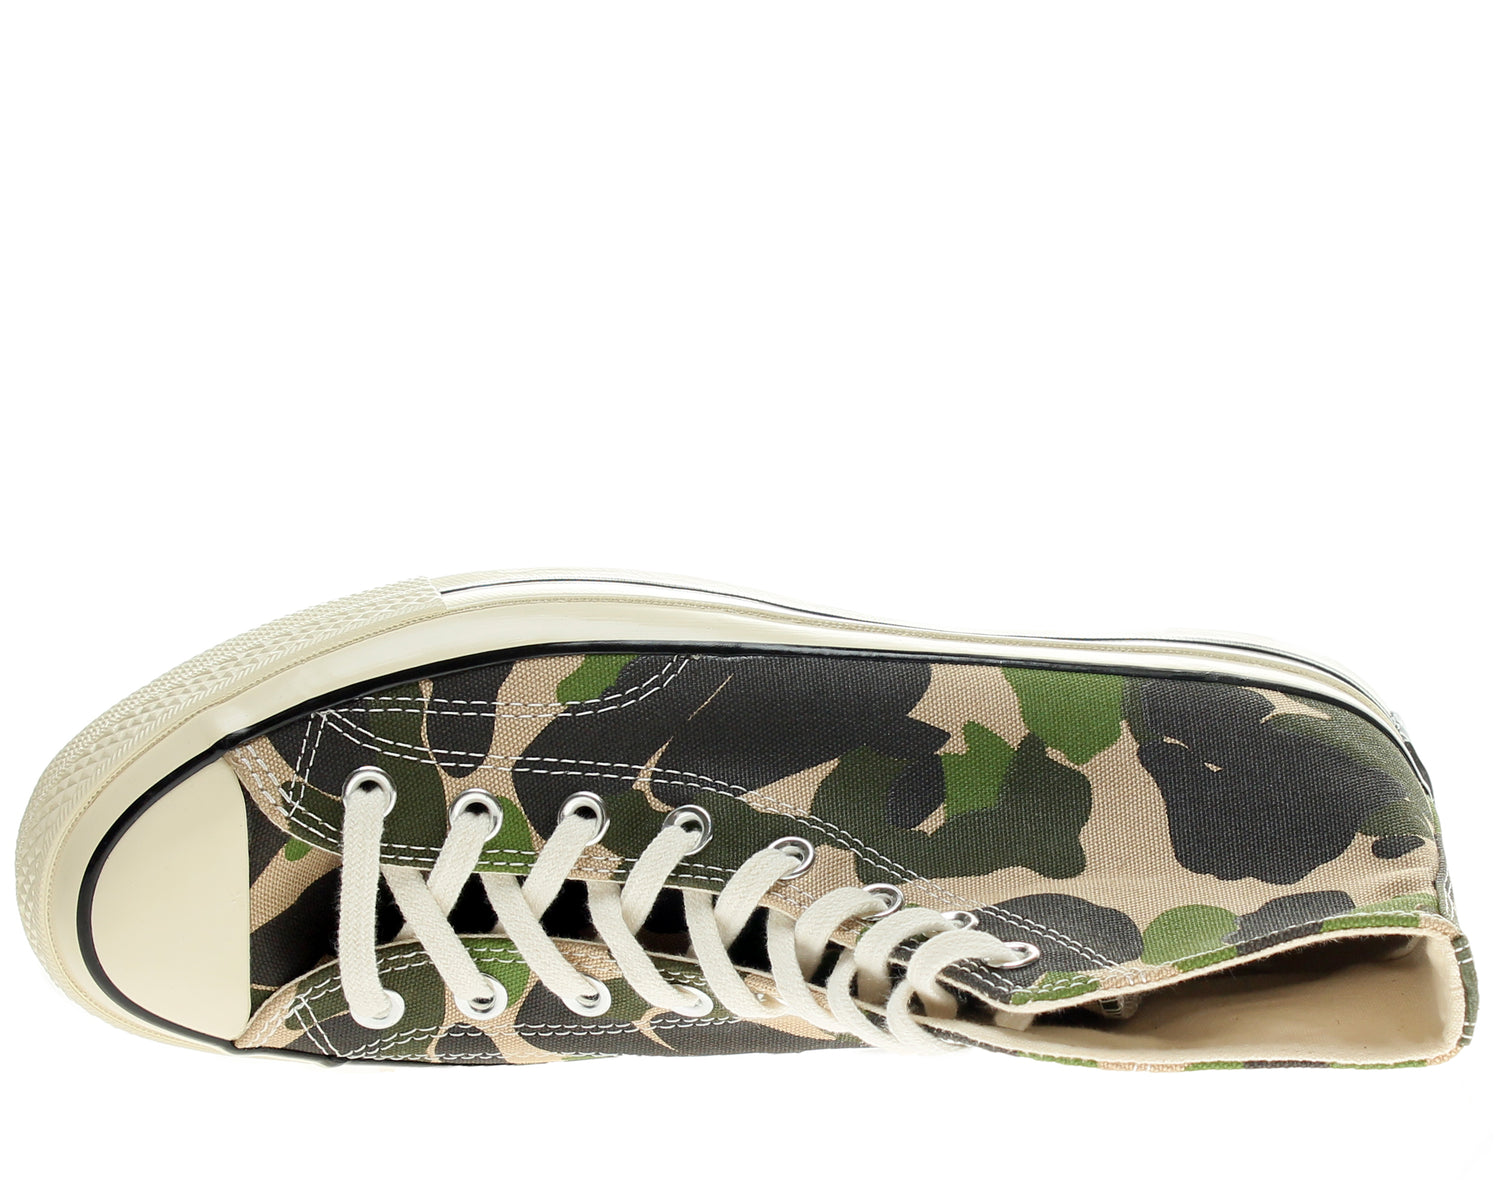 Converse Chuck Taylor All Star 70' Camoflage High top Sneakers